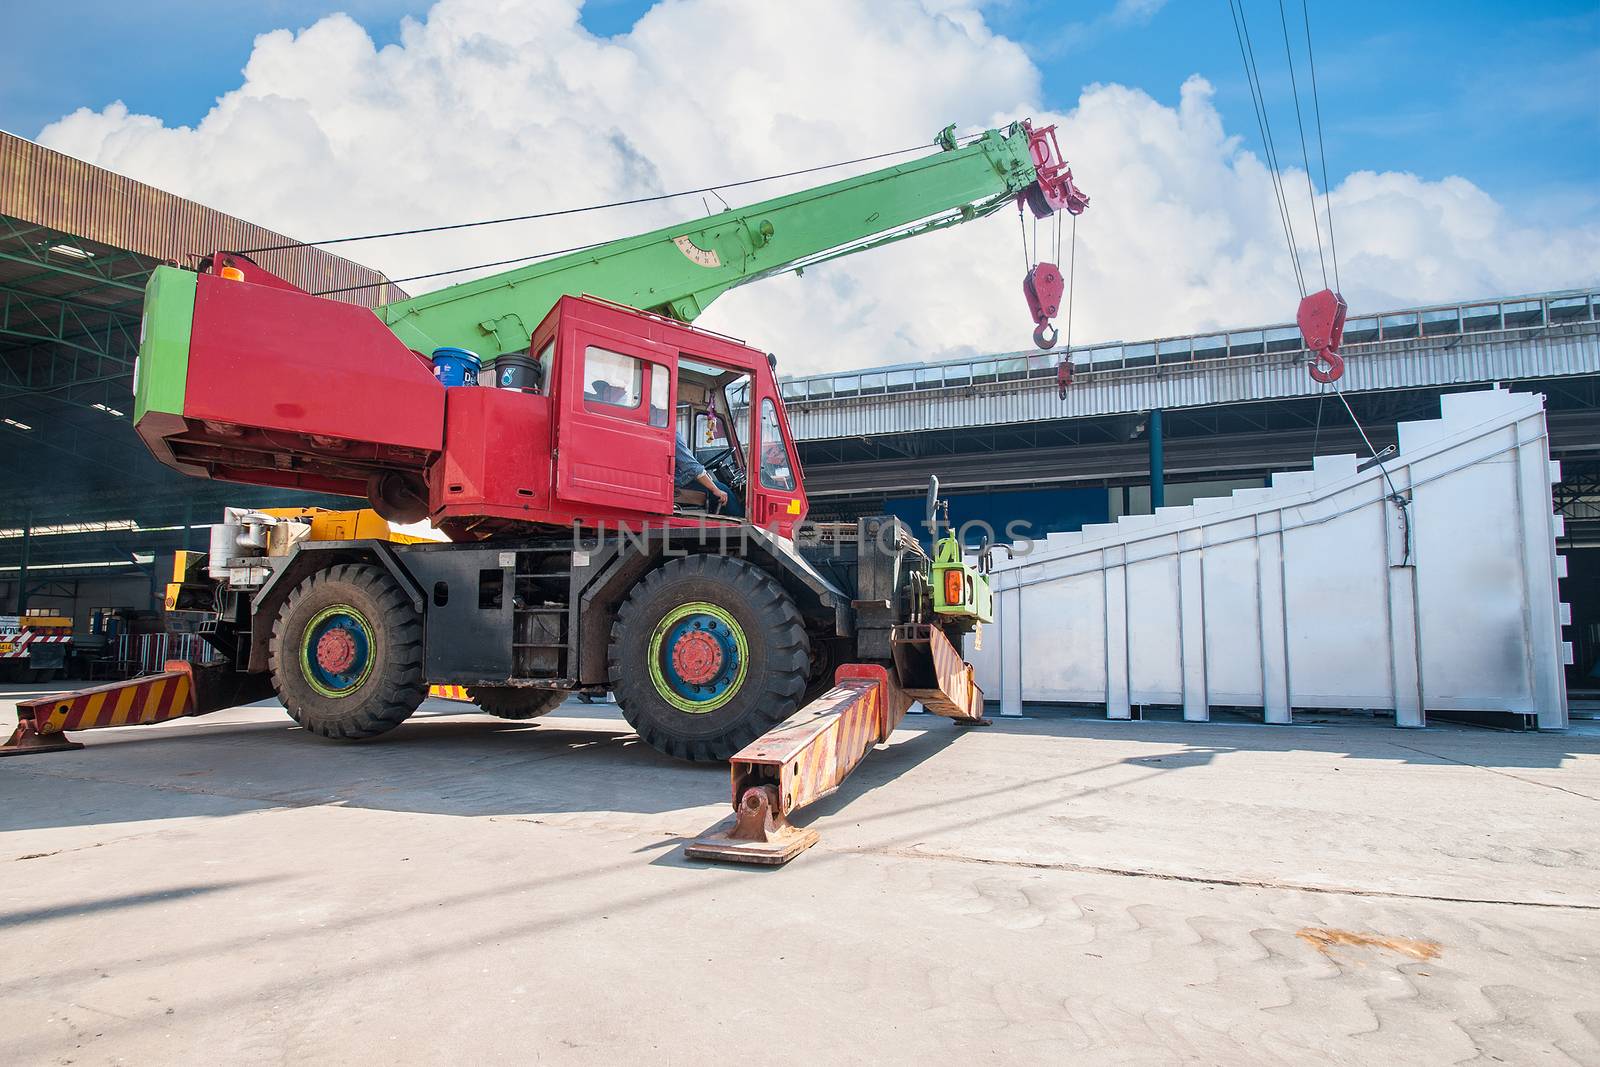 Mobile crane operating by lifting and moving an heavy electric g by Surasak